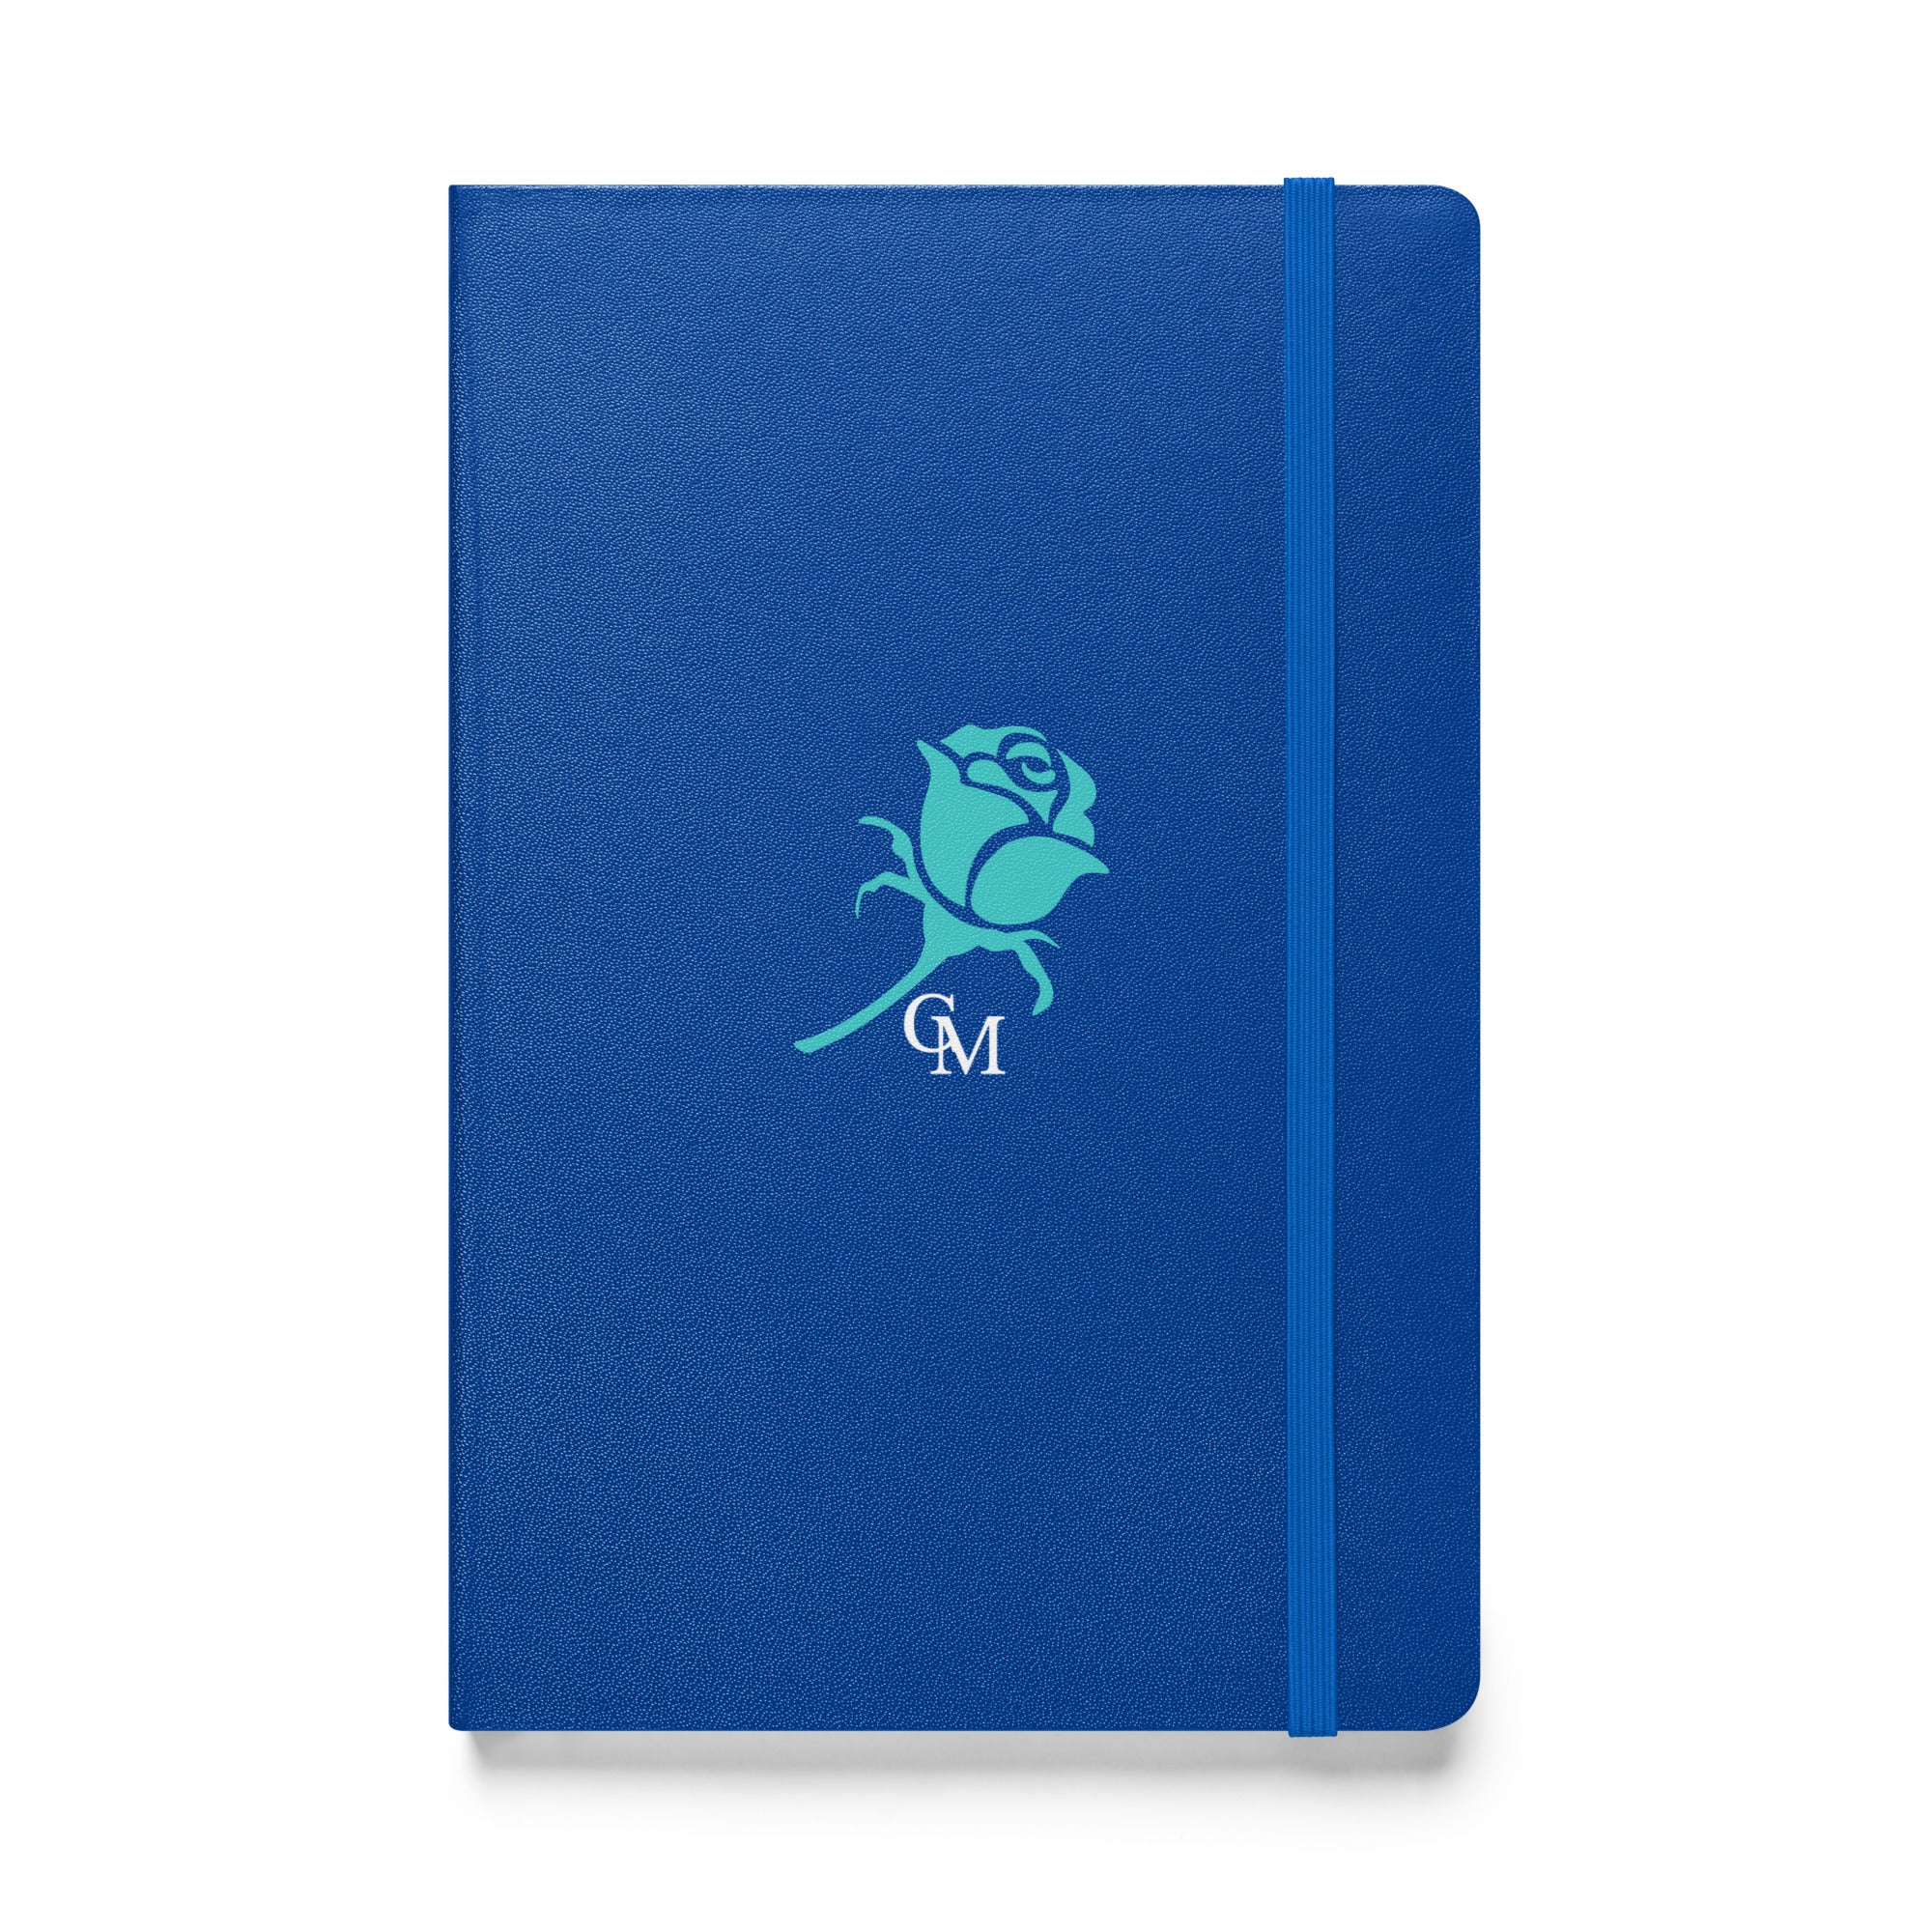 CM Turquoise Rose Hardcover bound journal/notebook